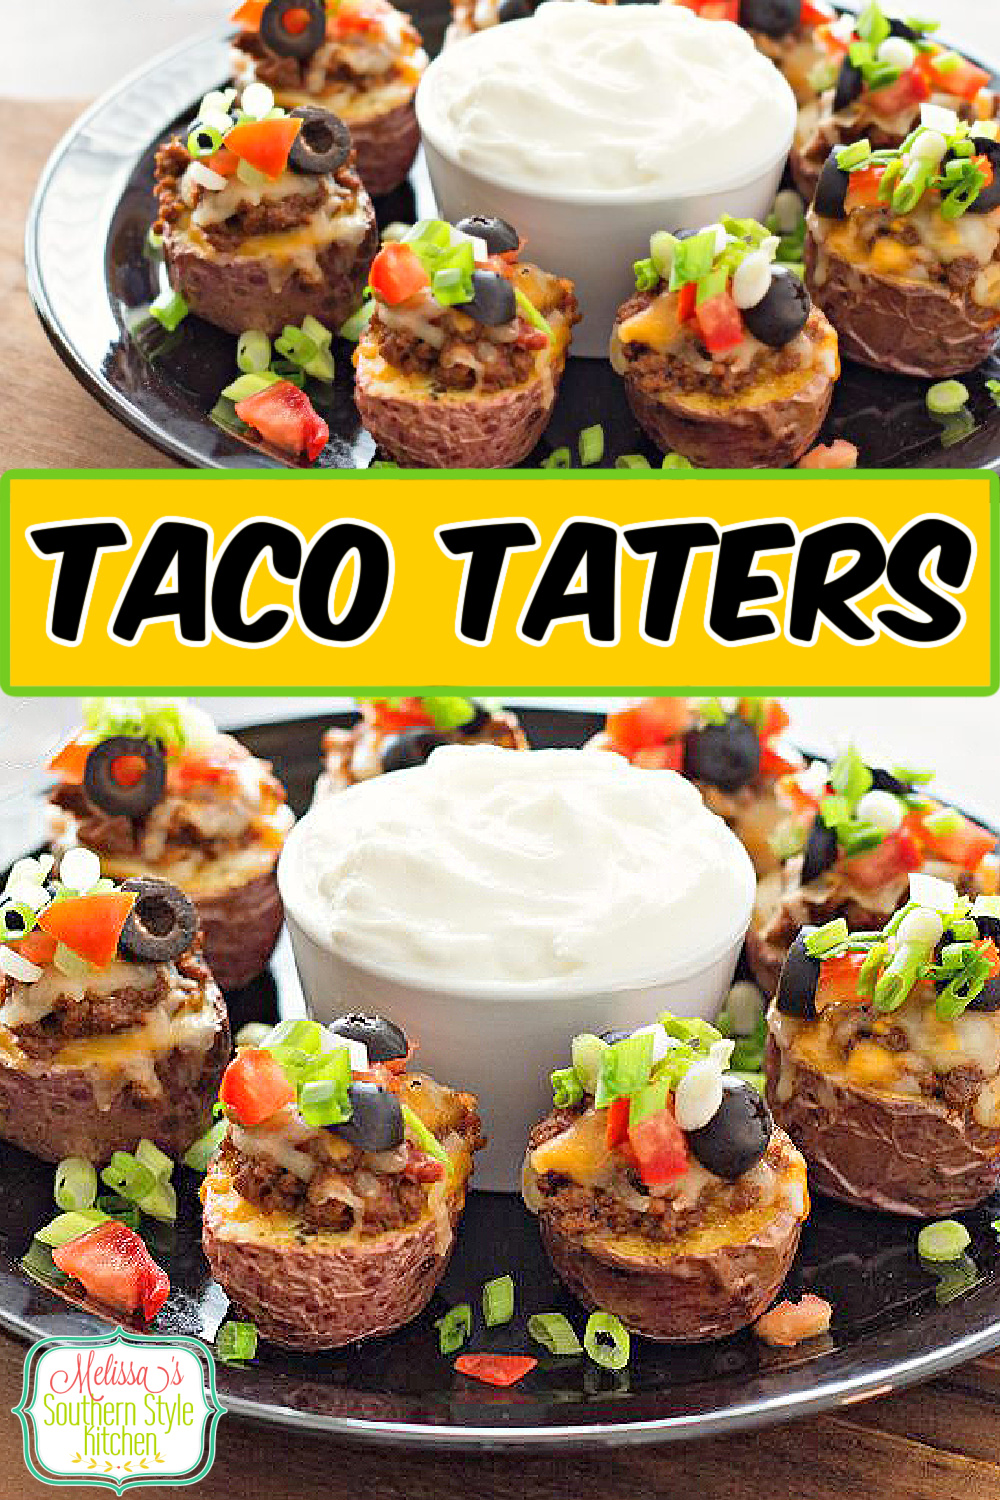 Up your game day snack menu with these mini Taco Taters served topped with all of your favorite South of the border taco fixing's #tacos #tacotaters #potatoes #potatoskins #gamedaysnacks #appetizers #tacotuesdayrecipes #southernstyle via @melissasssk